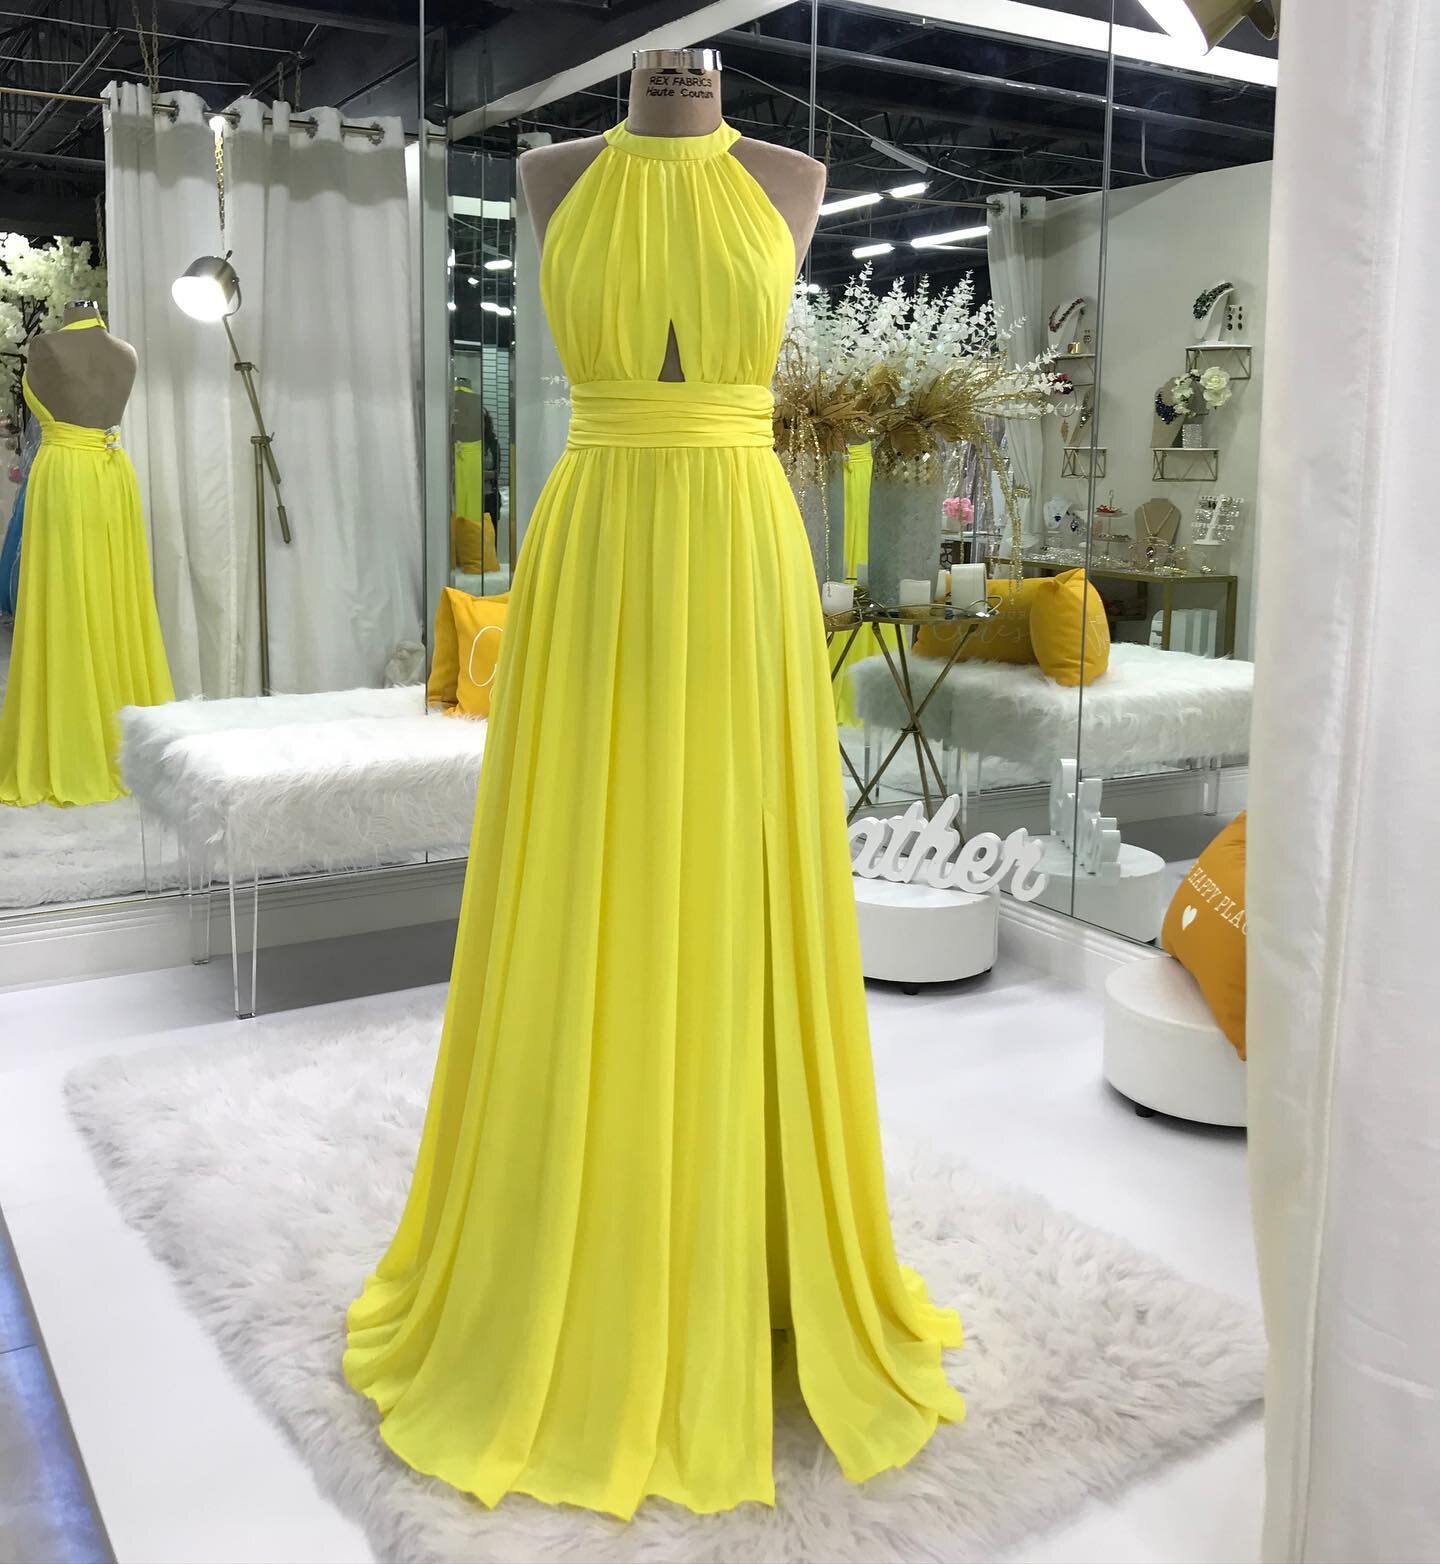 this color is perfect for the summer time.
simple , open , and breathable ! 💛💛 
&bull;
&bull;
&bull;
&bull;

#quince#quinceañeramiami #quinceañera #quincedress #miami#miamidresses #miamidressrental#southflorida #dresses #gowns #dressrental #quinc